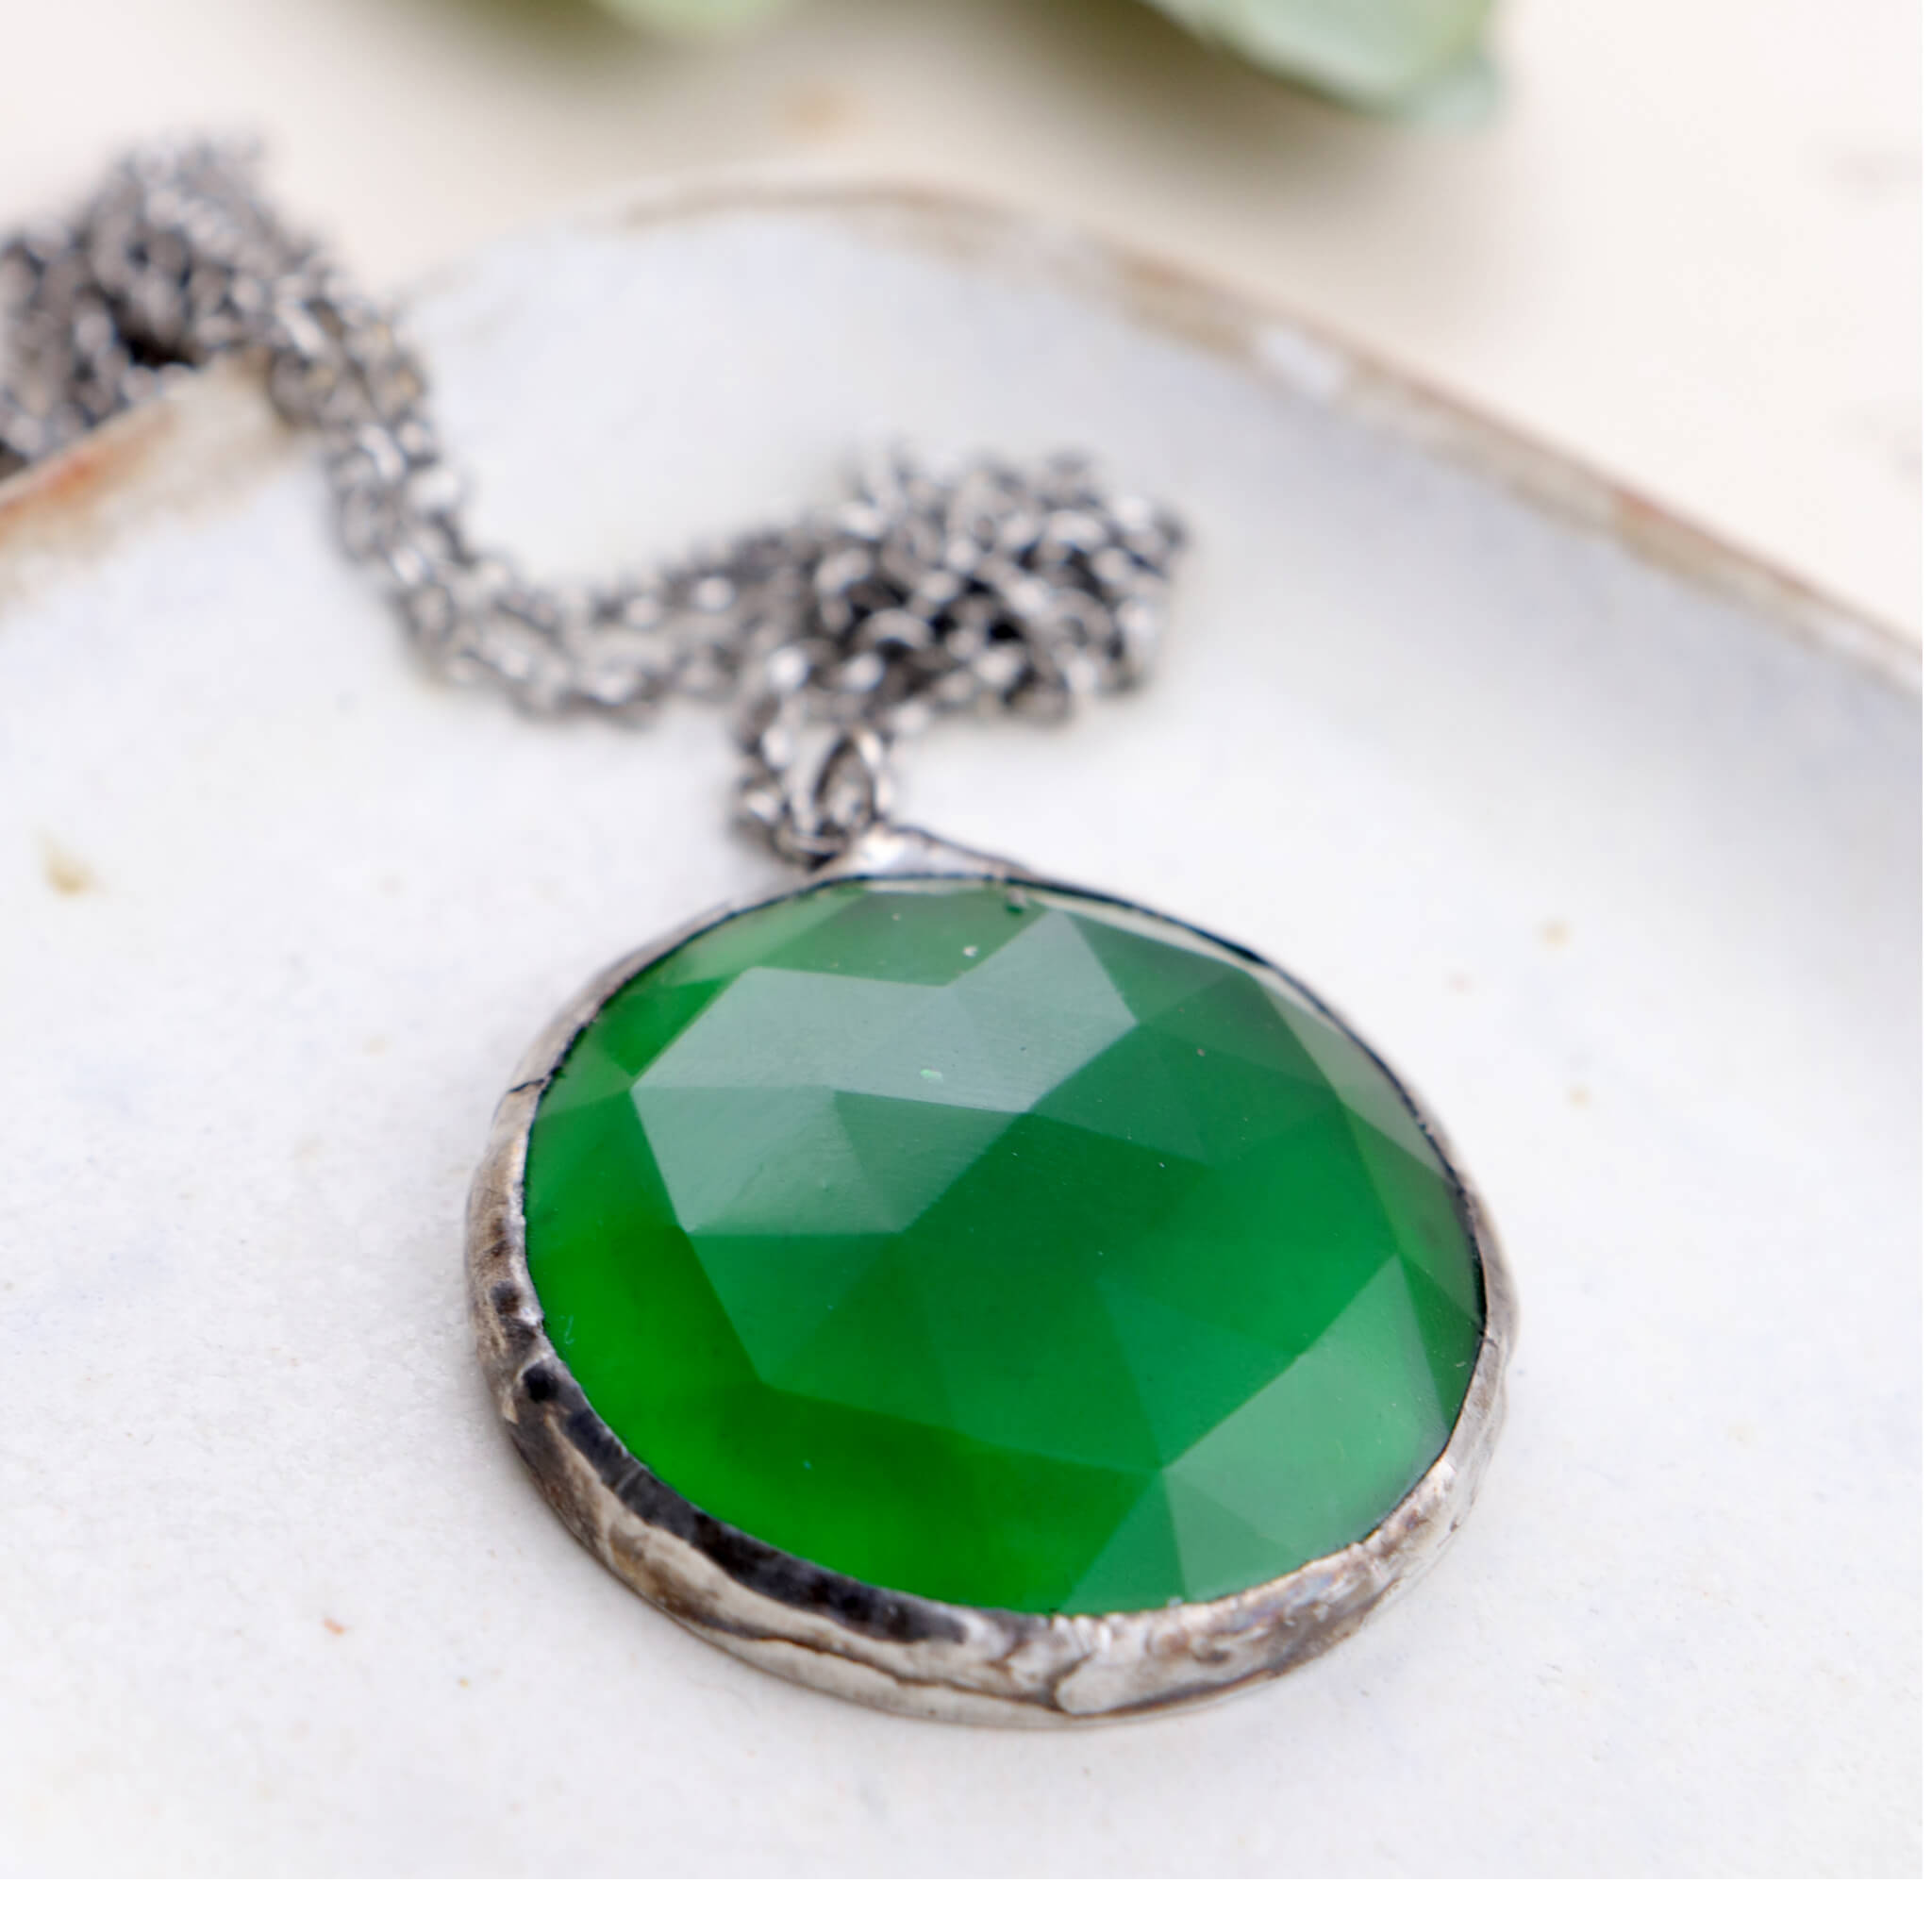 Faceted emerald glass framed into necklace lying on a dish